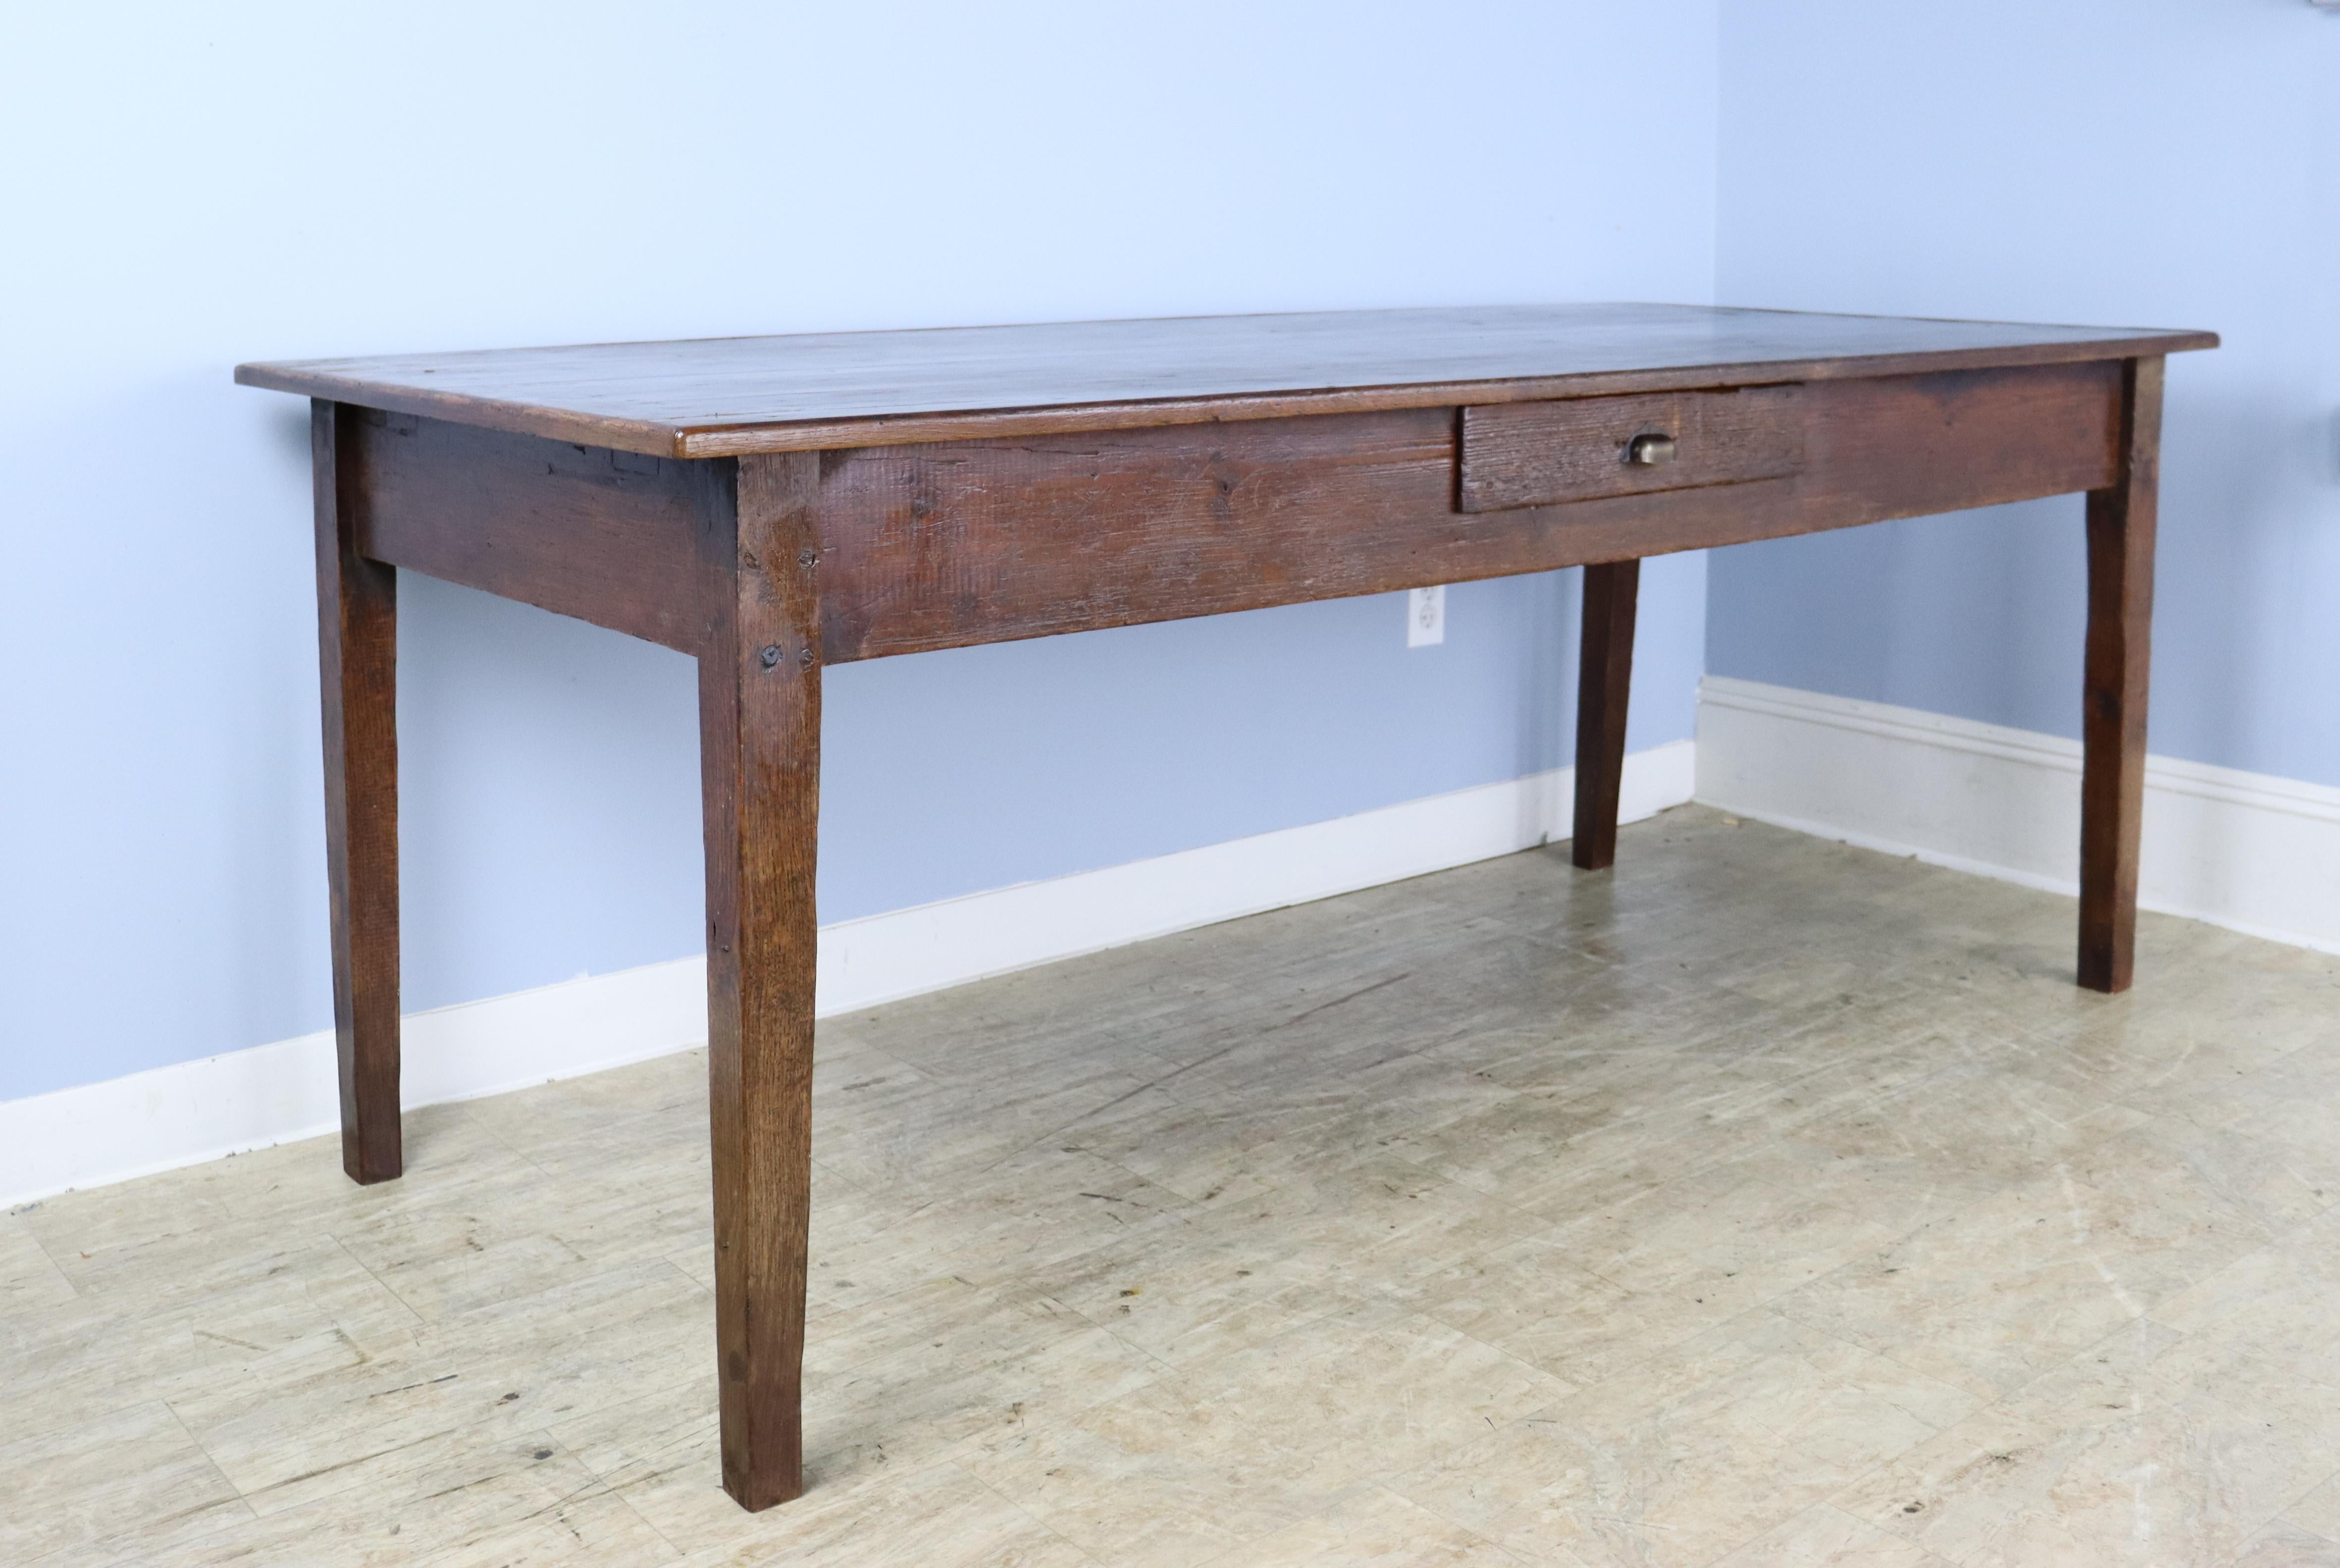 A well proportioned farm table with a chestnut base and a pine top with a decorative wooden edge. The top is in good antique condition and has nice color grain and patina. The apron height of 24.5 inches is good for knees and there are 71.5 inches